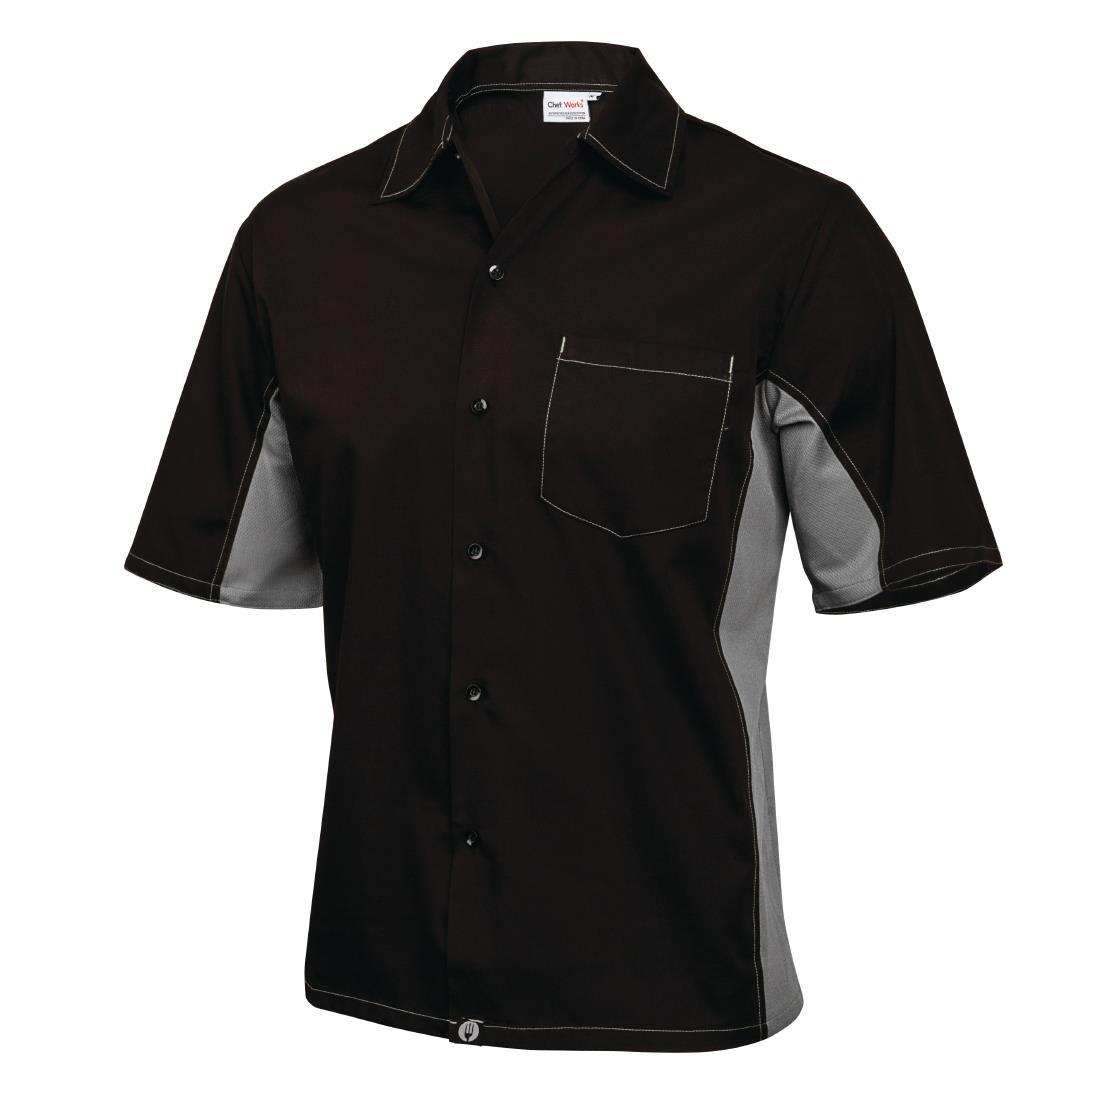 Chef Works Unisex Contrast Shirt Black and Grey M - A948-M  - 2